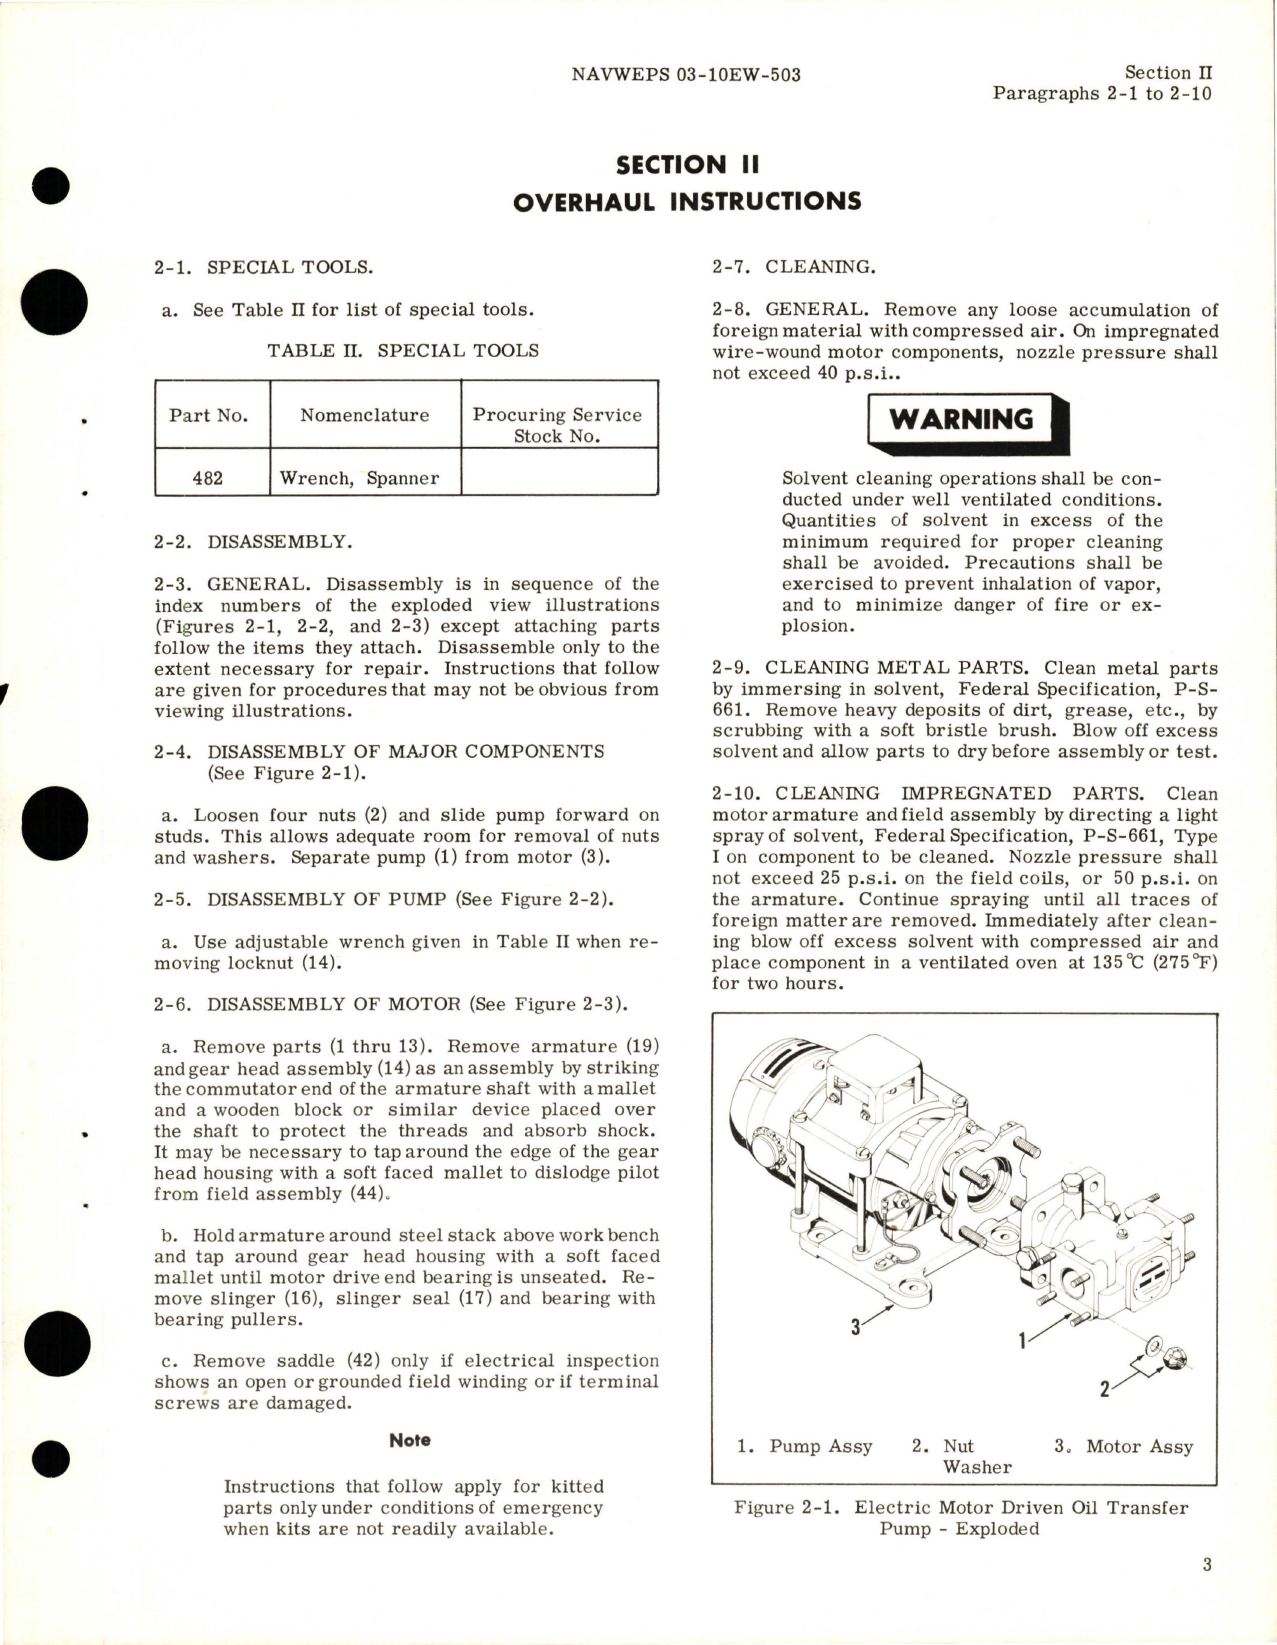 Sample page 5 from AirCorps Library document: Overhaul Instructions for Oil Transfer Electric Motor Driven Pump - Model RG9840 